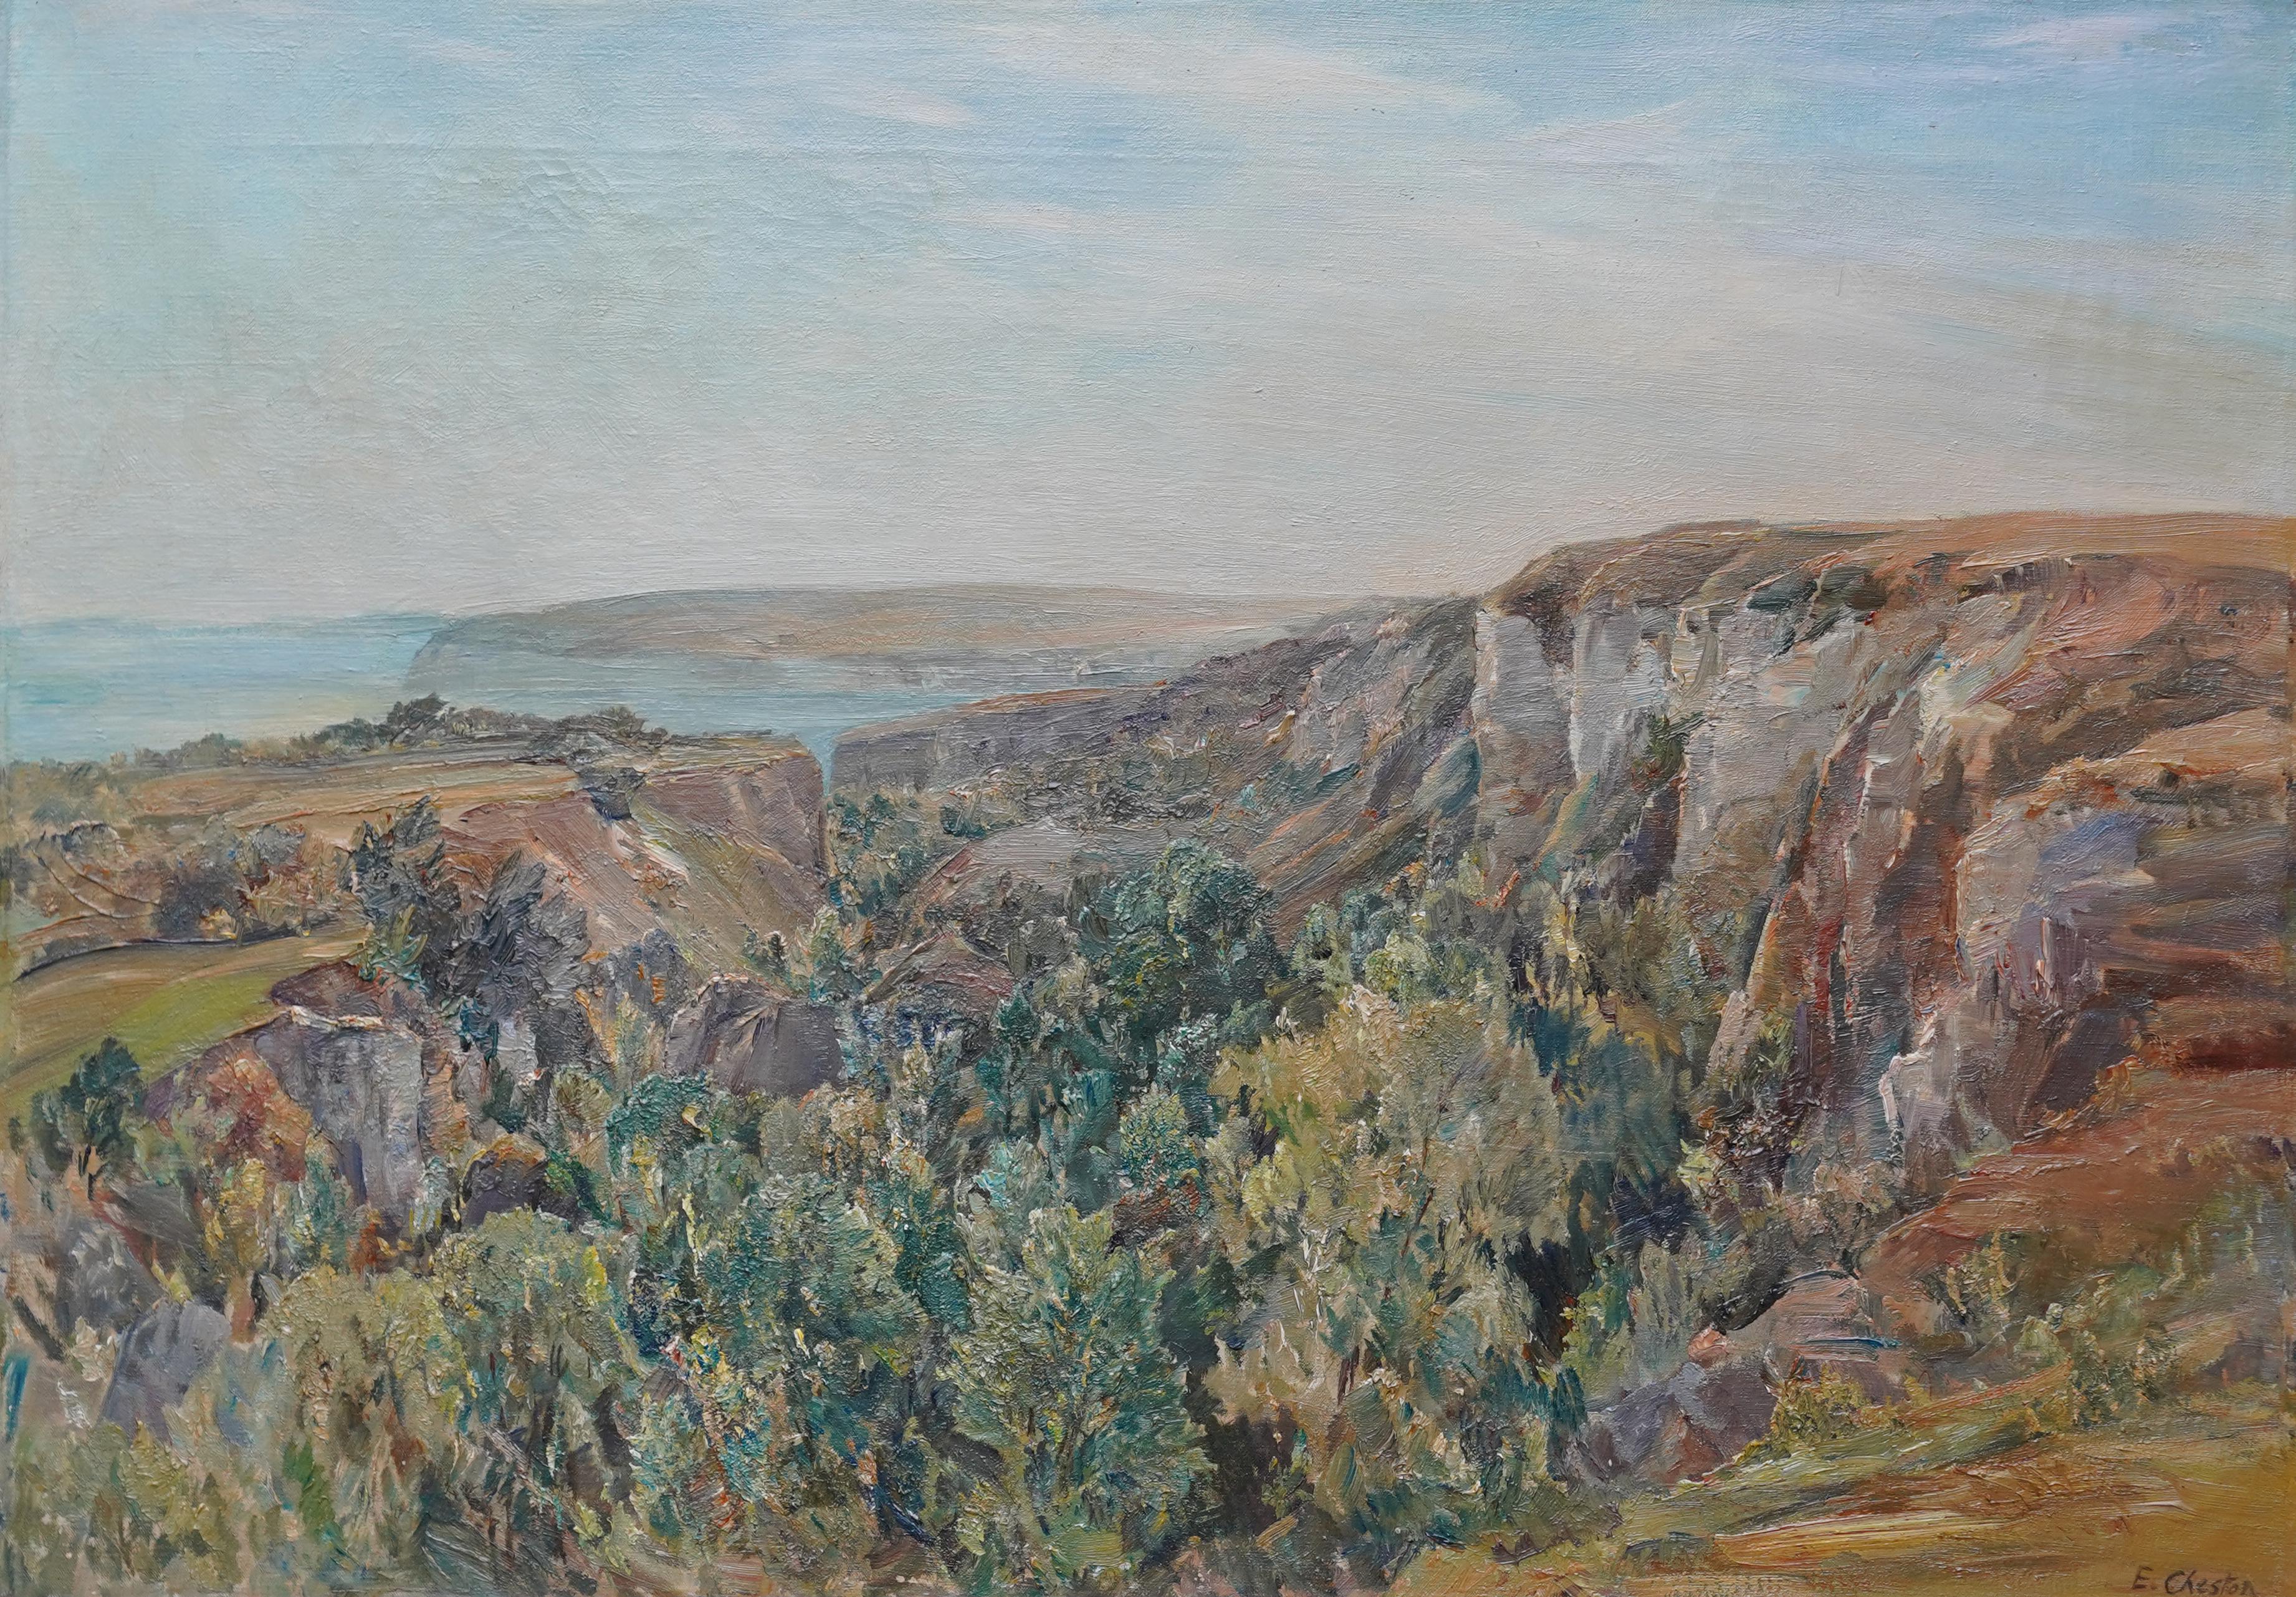 The Landslip Coastal View - British 1920s art landscape oil painting NEAC artist - Painting by Evelyn Cheston